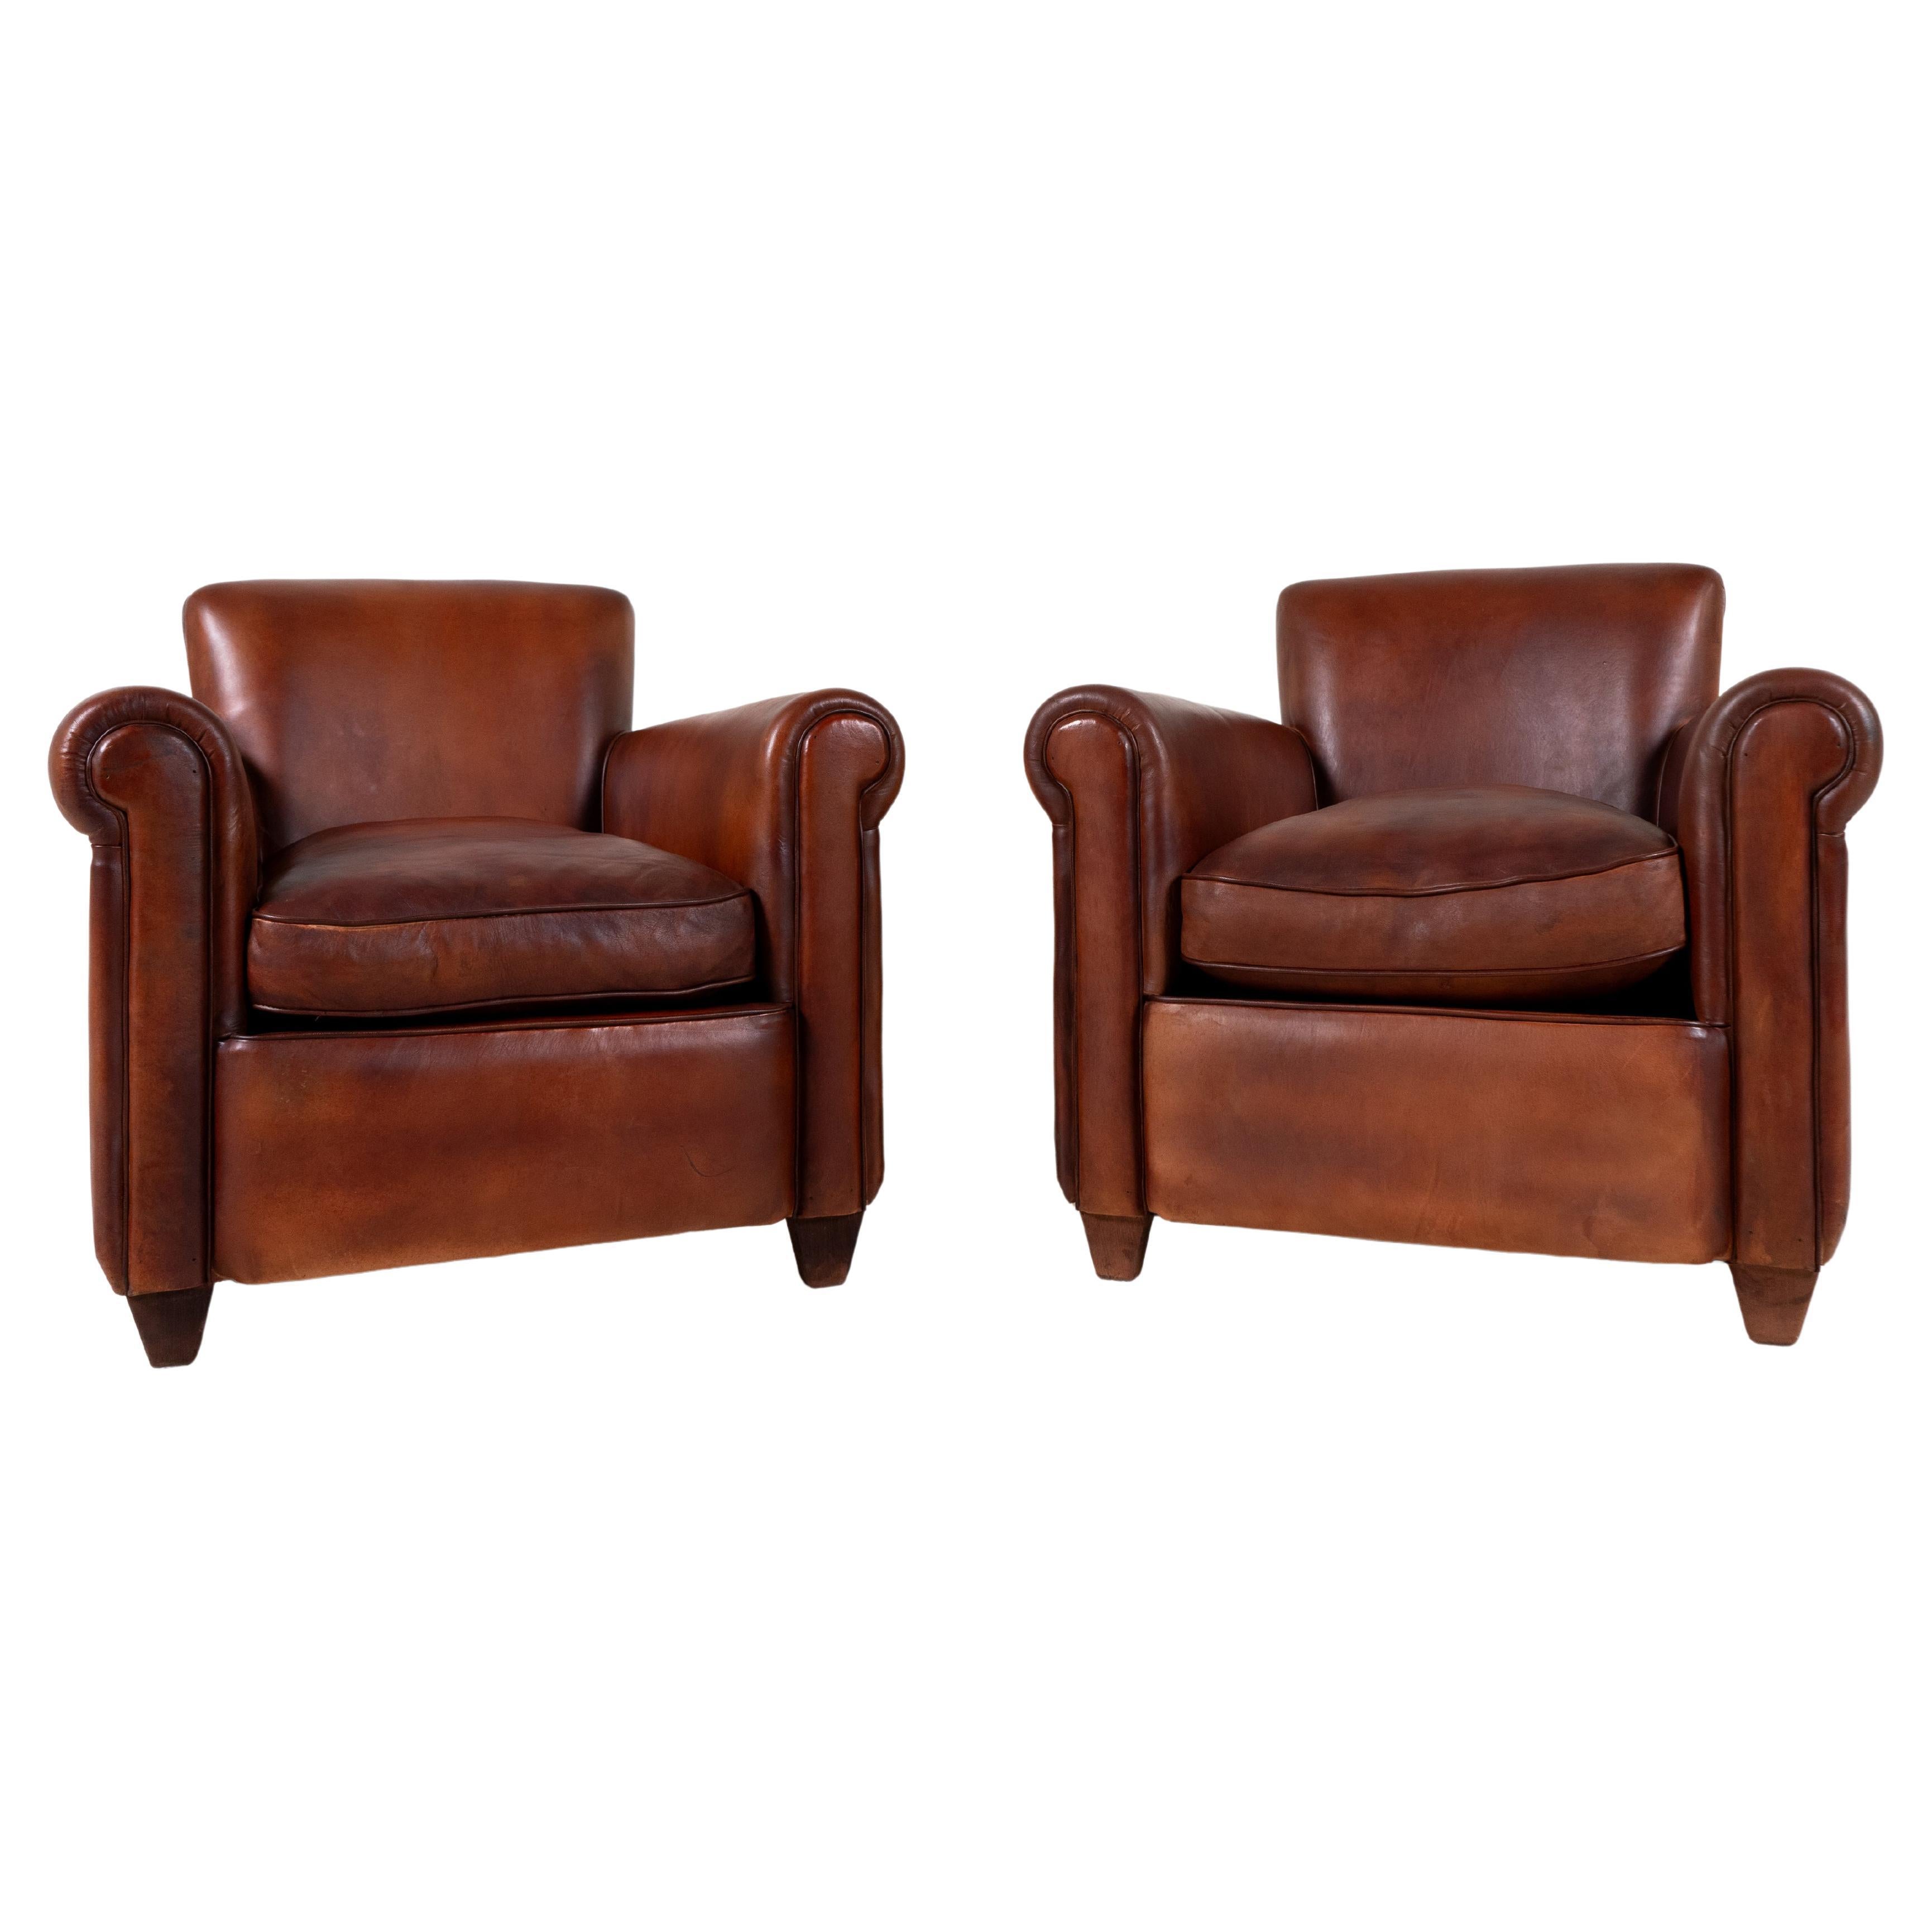 A Pair of "Submarine" French Leather Club Chairs  For Sale